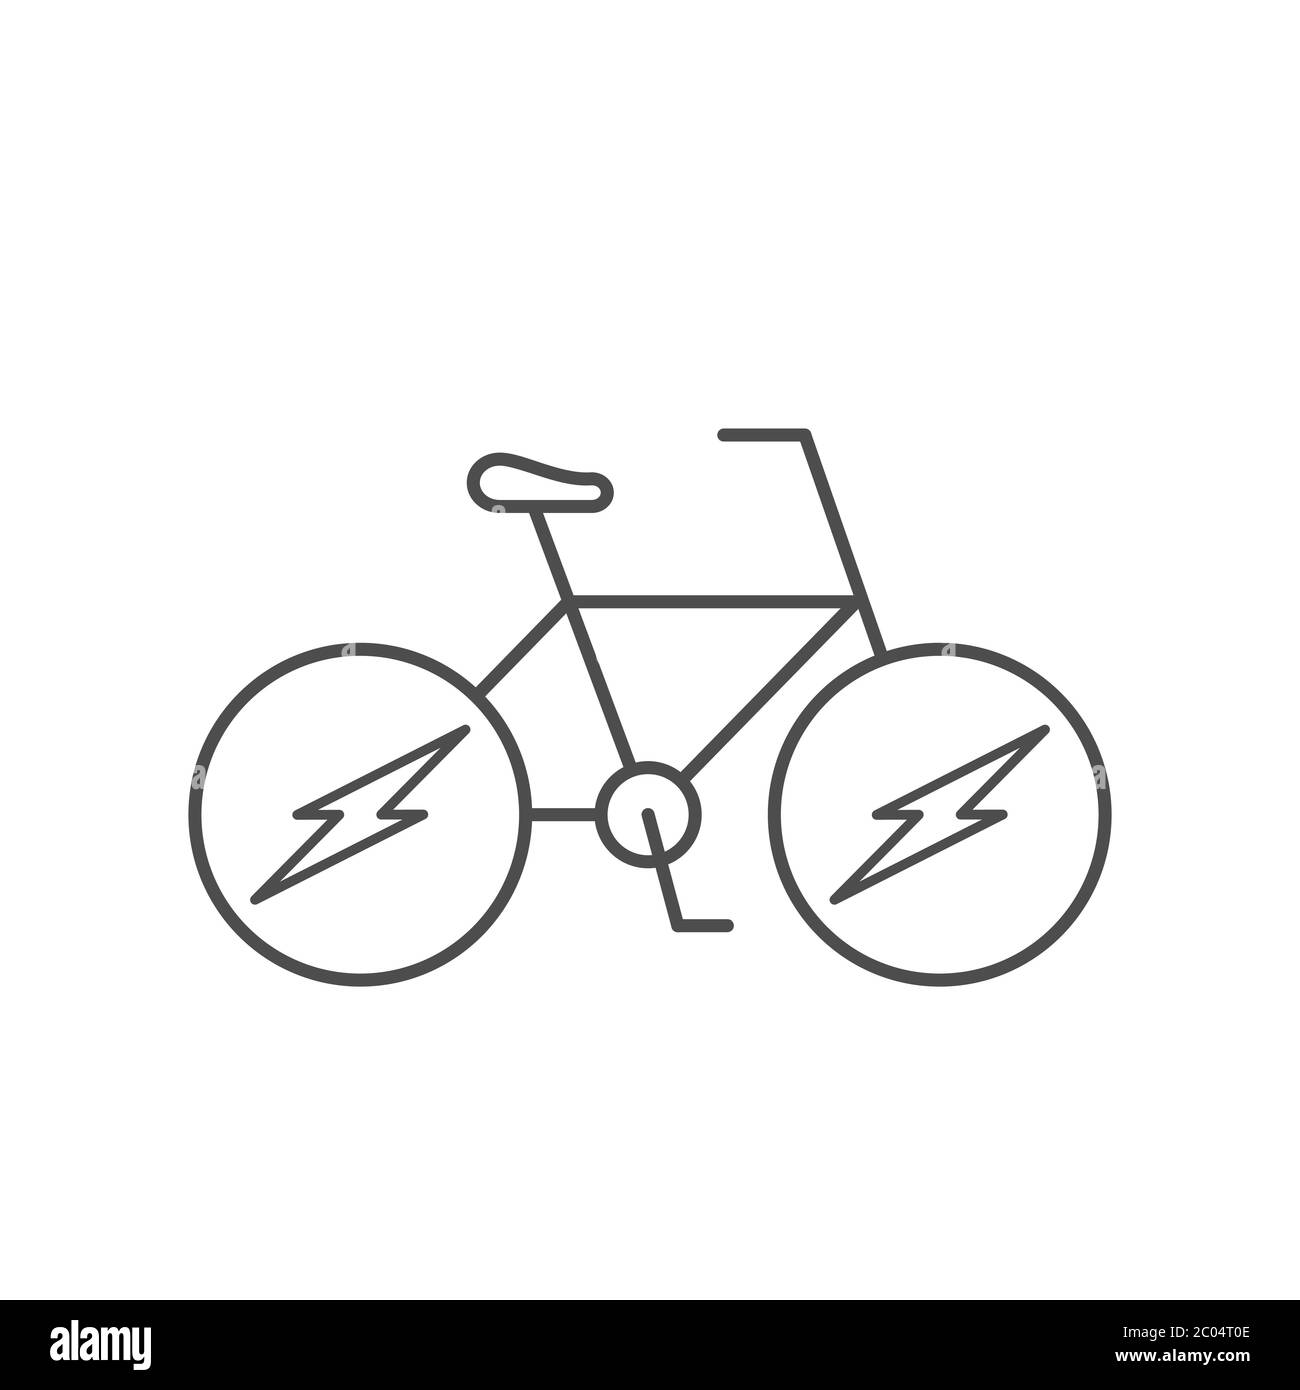 E bike line icon. Hybrid vehicle with pedals and motor. Electric bicycle with lightning bolt. City transportation, commuting. Black outline on white Stock Vector